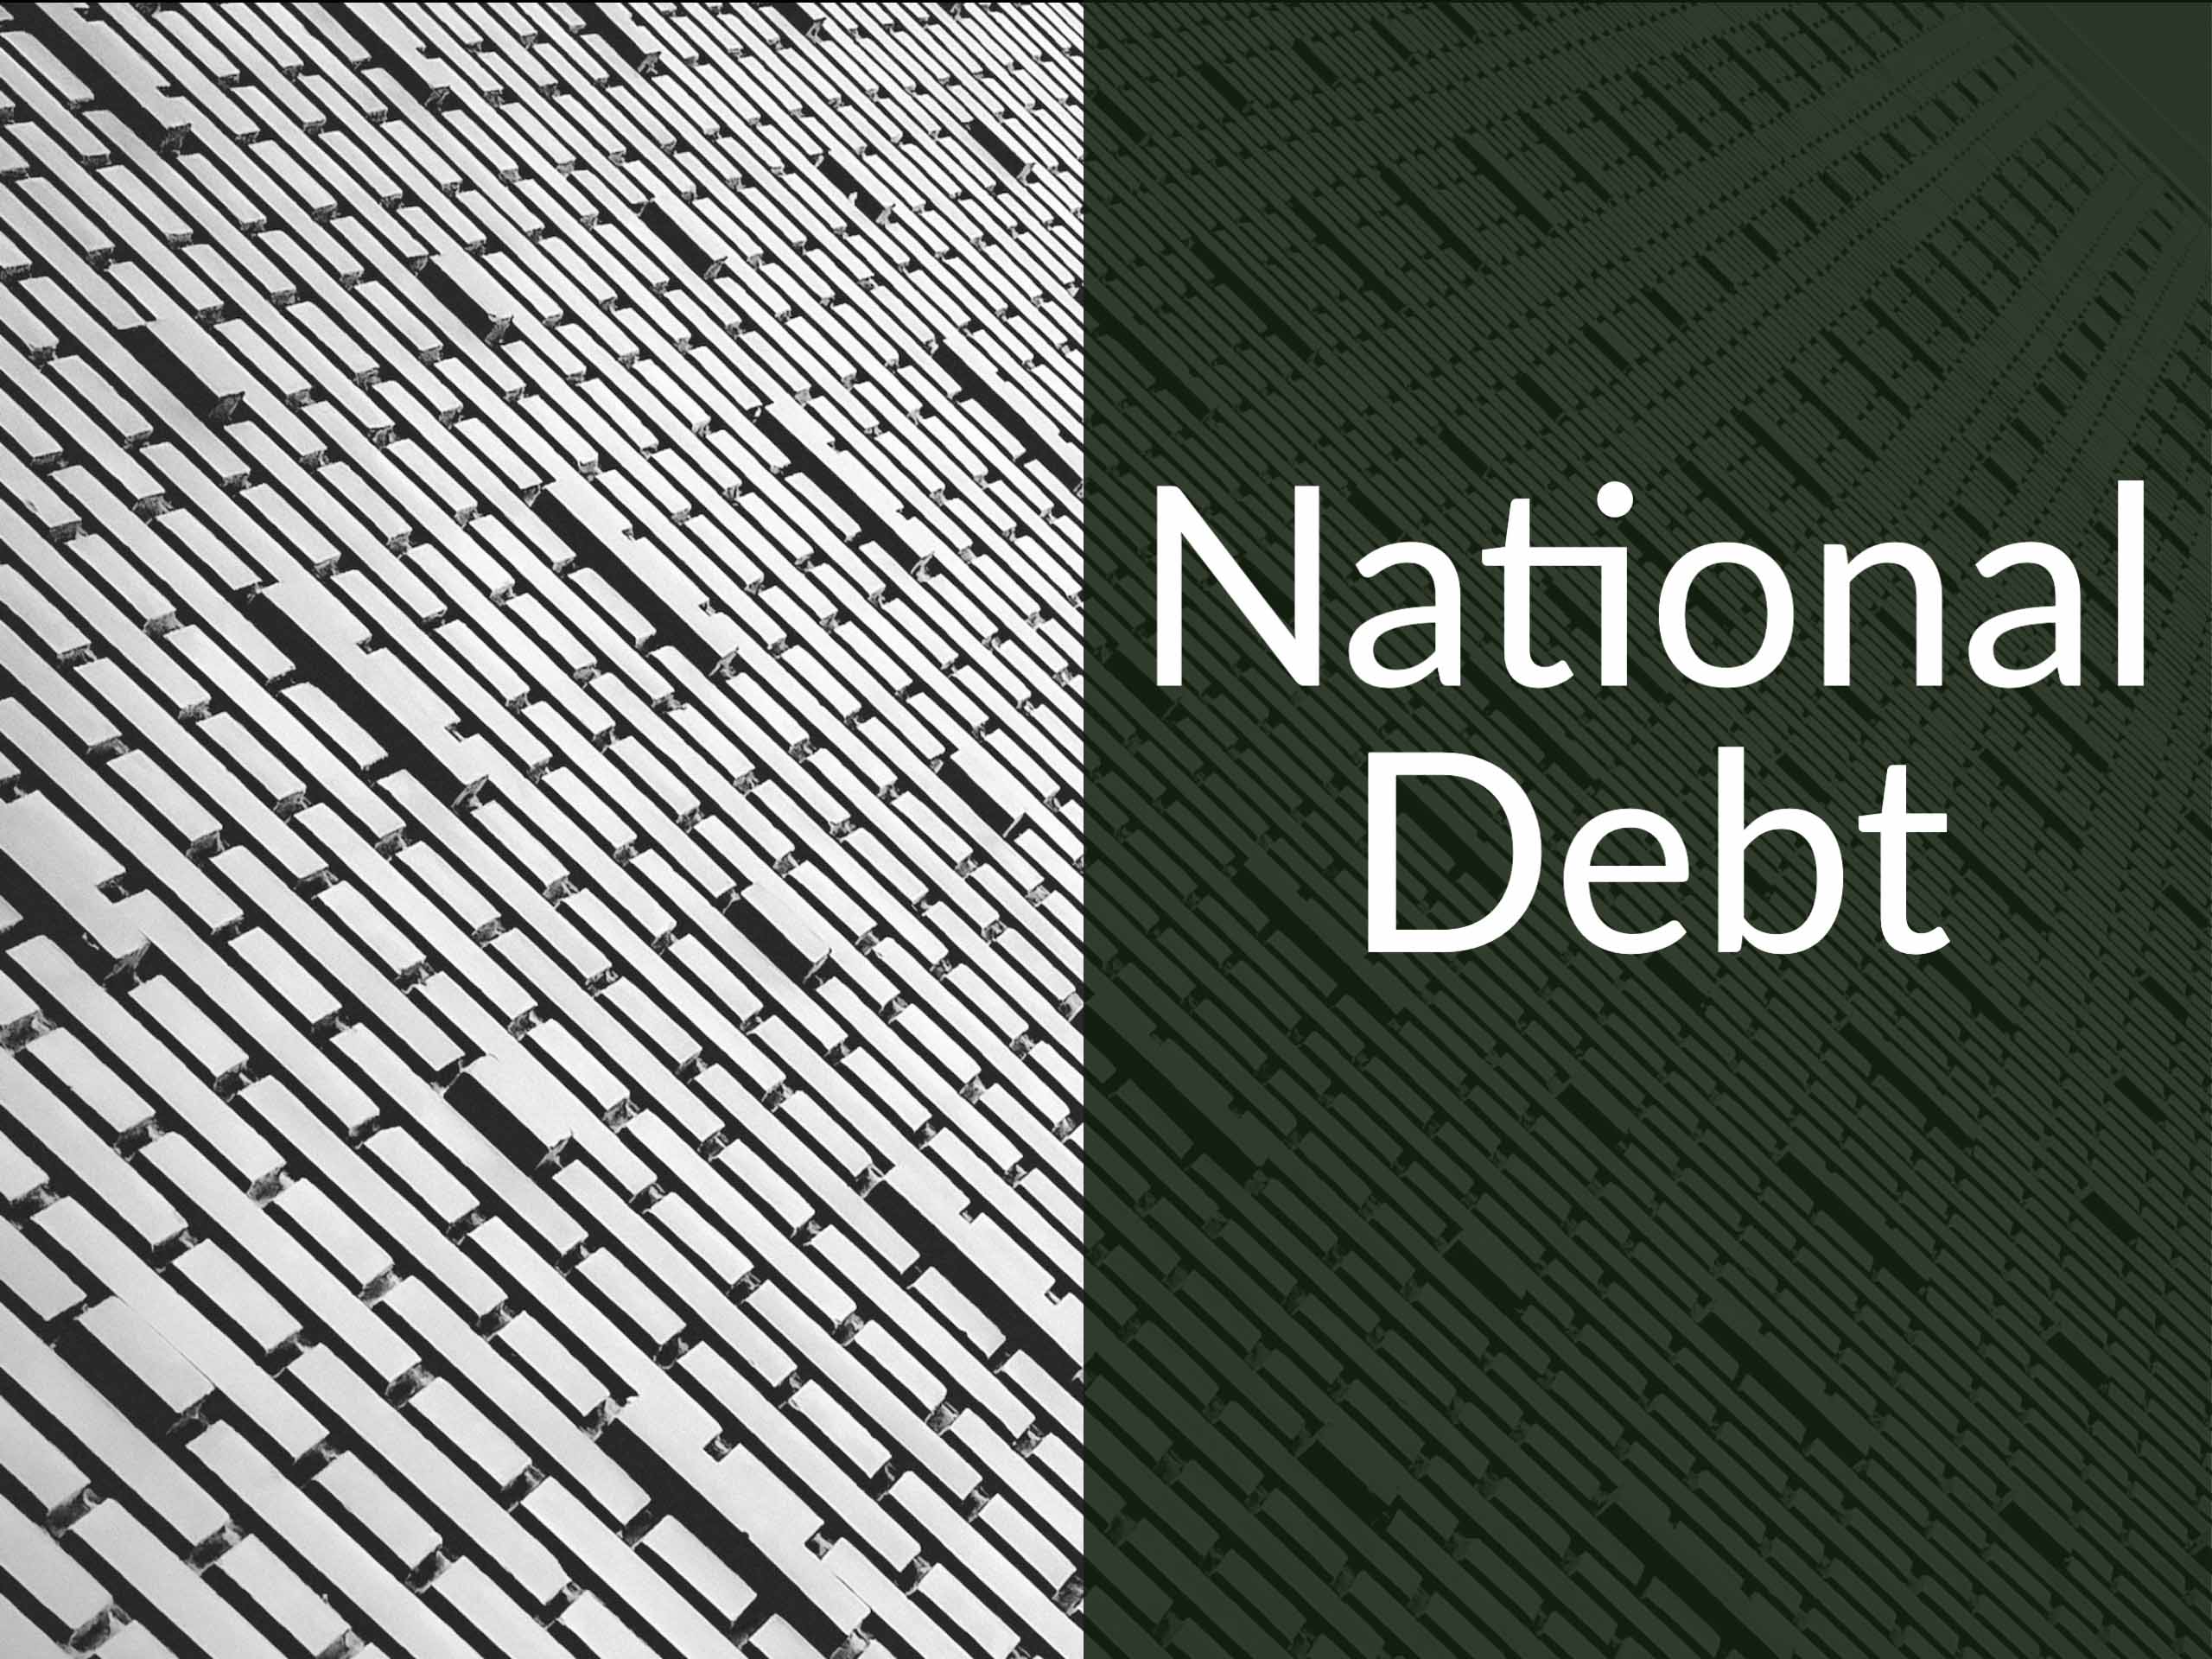 Geometric architecture with caption "National Debt" 